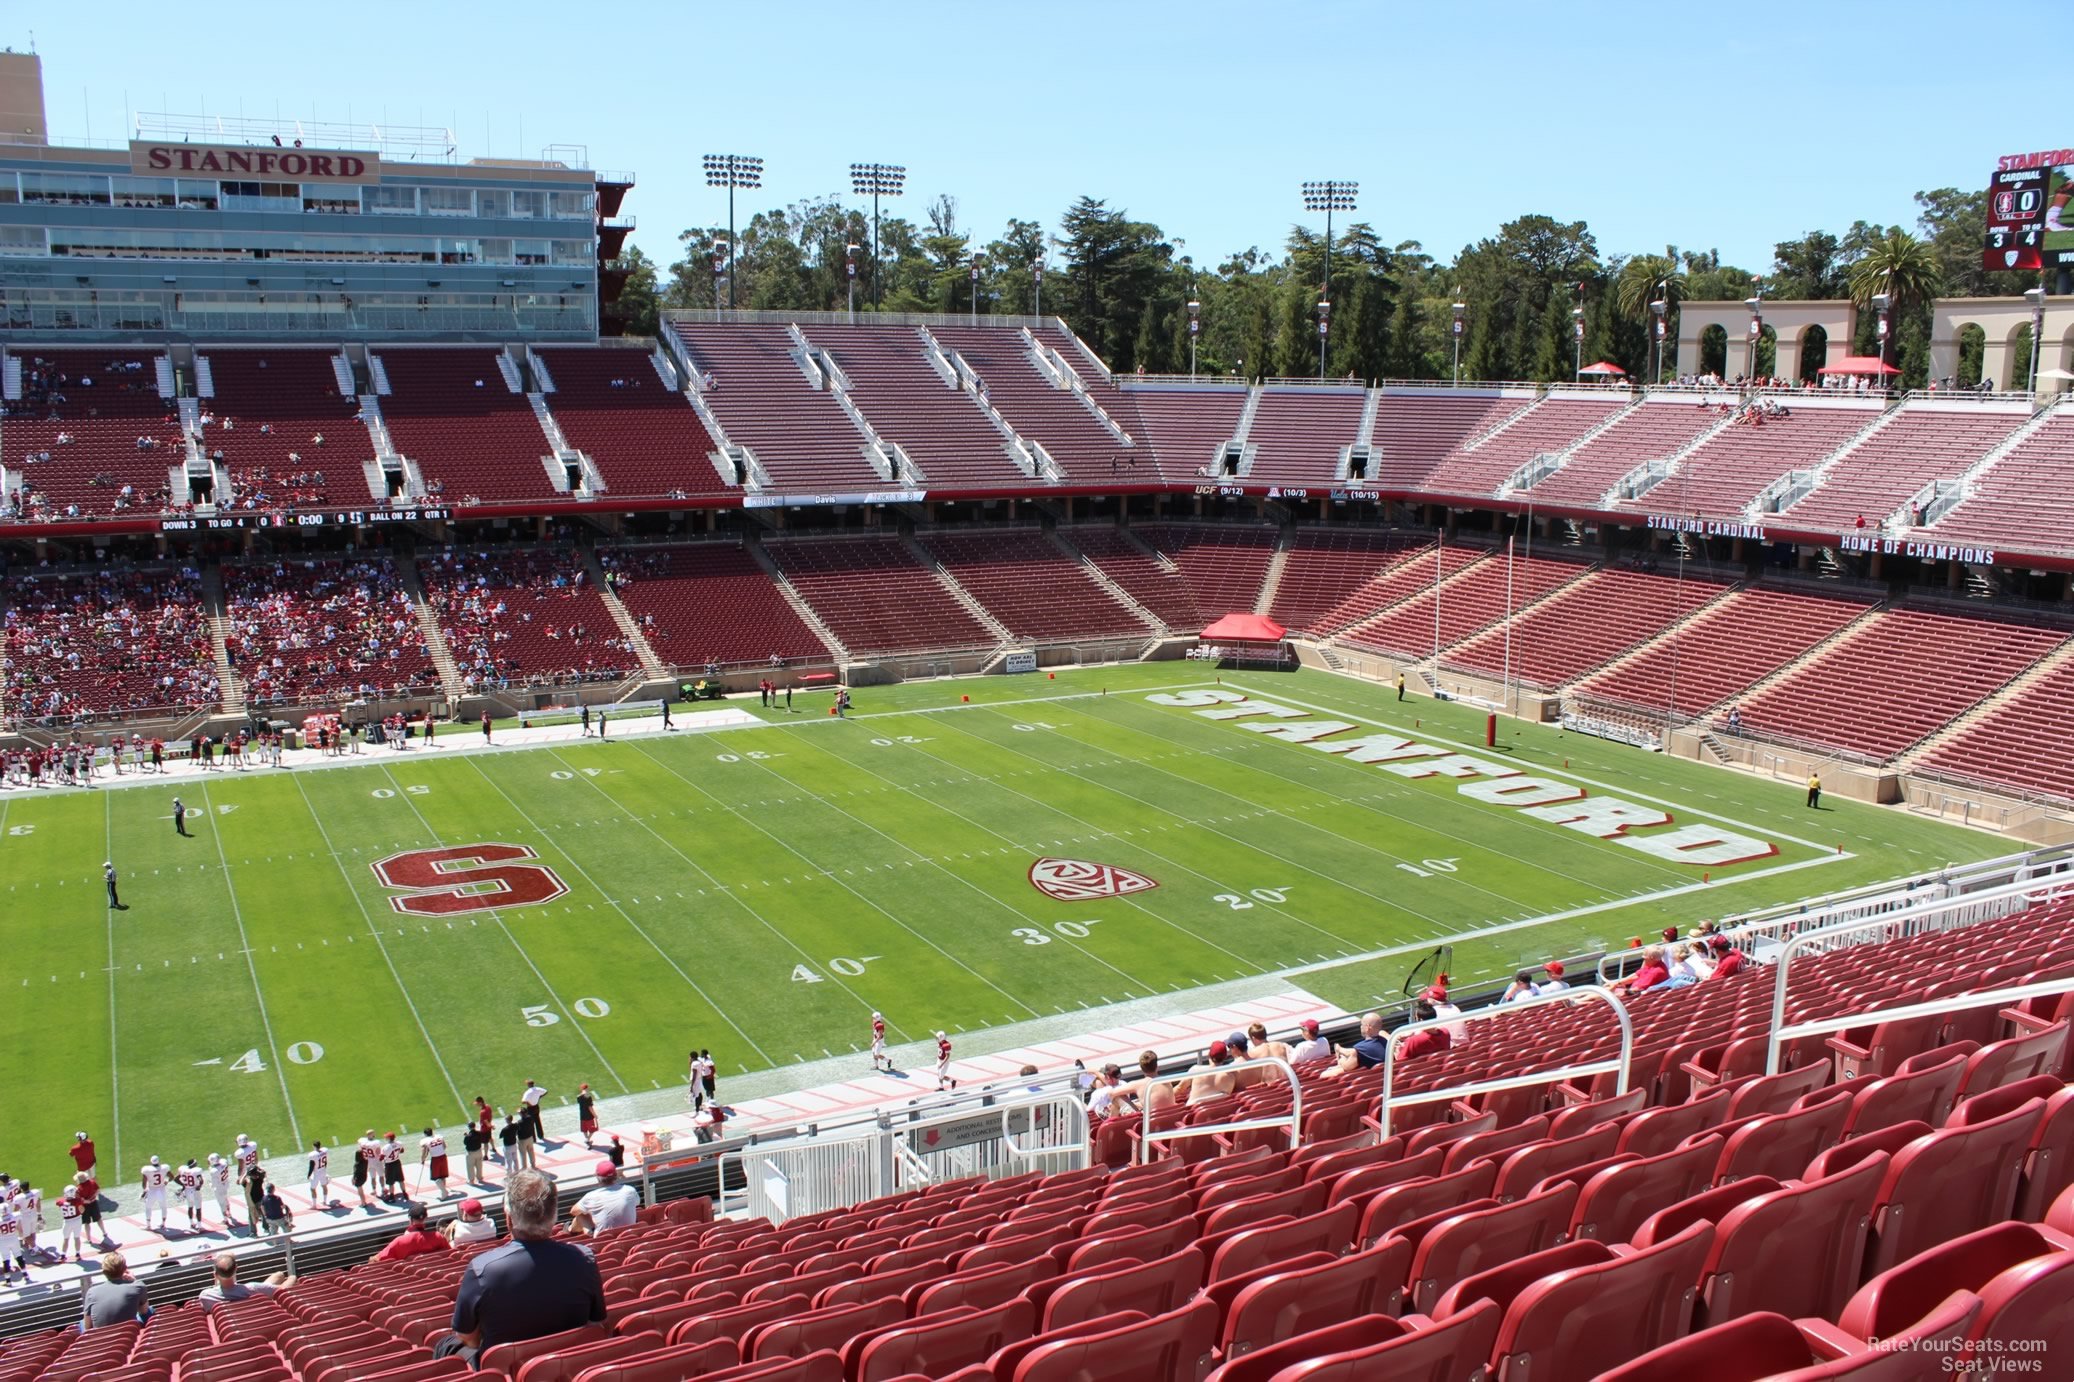 section 234, row x seat view  - stanford stadium